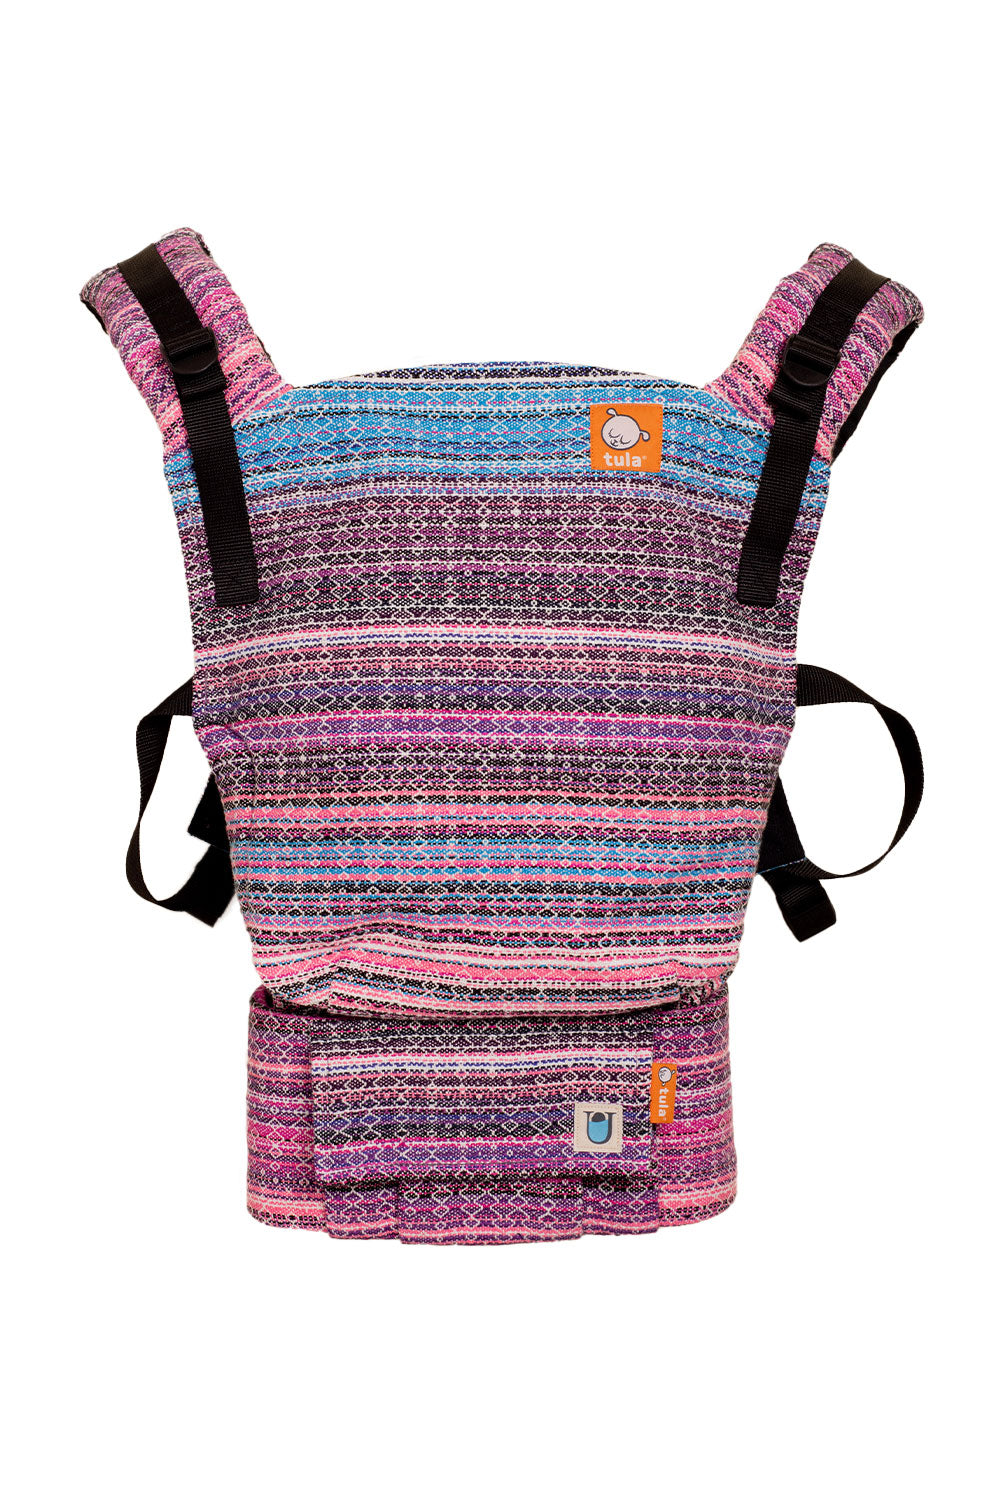 Emily Jeane - Signature Handwoven Free-to-Grow Baby Carrier